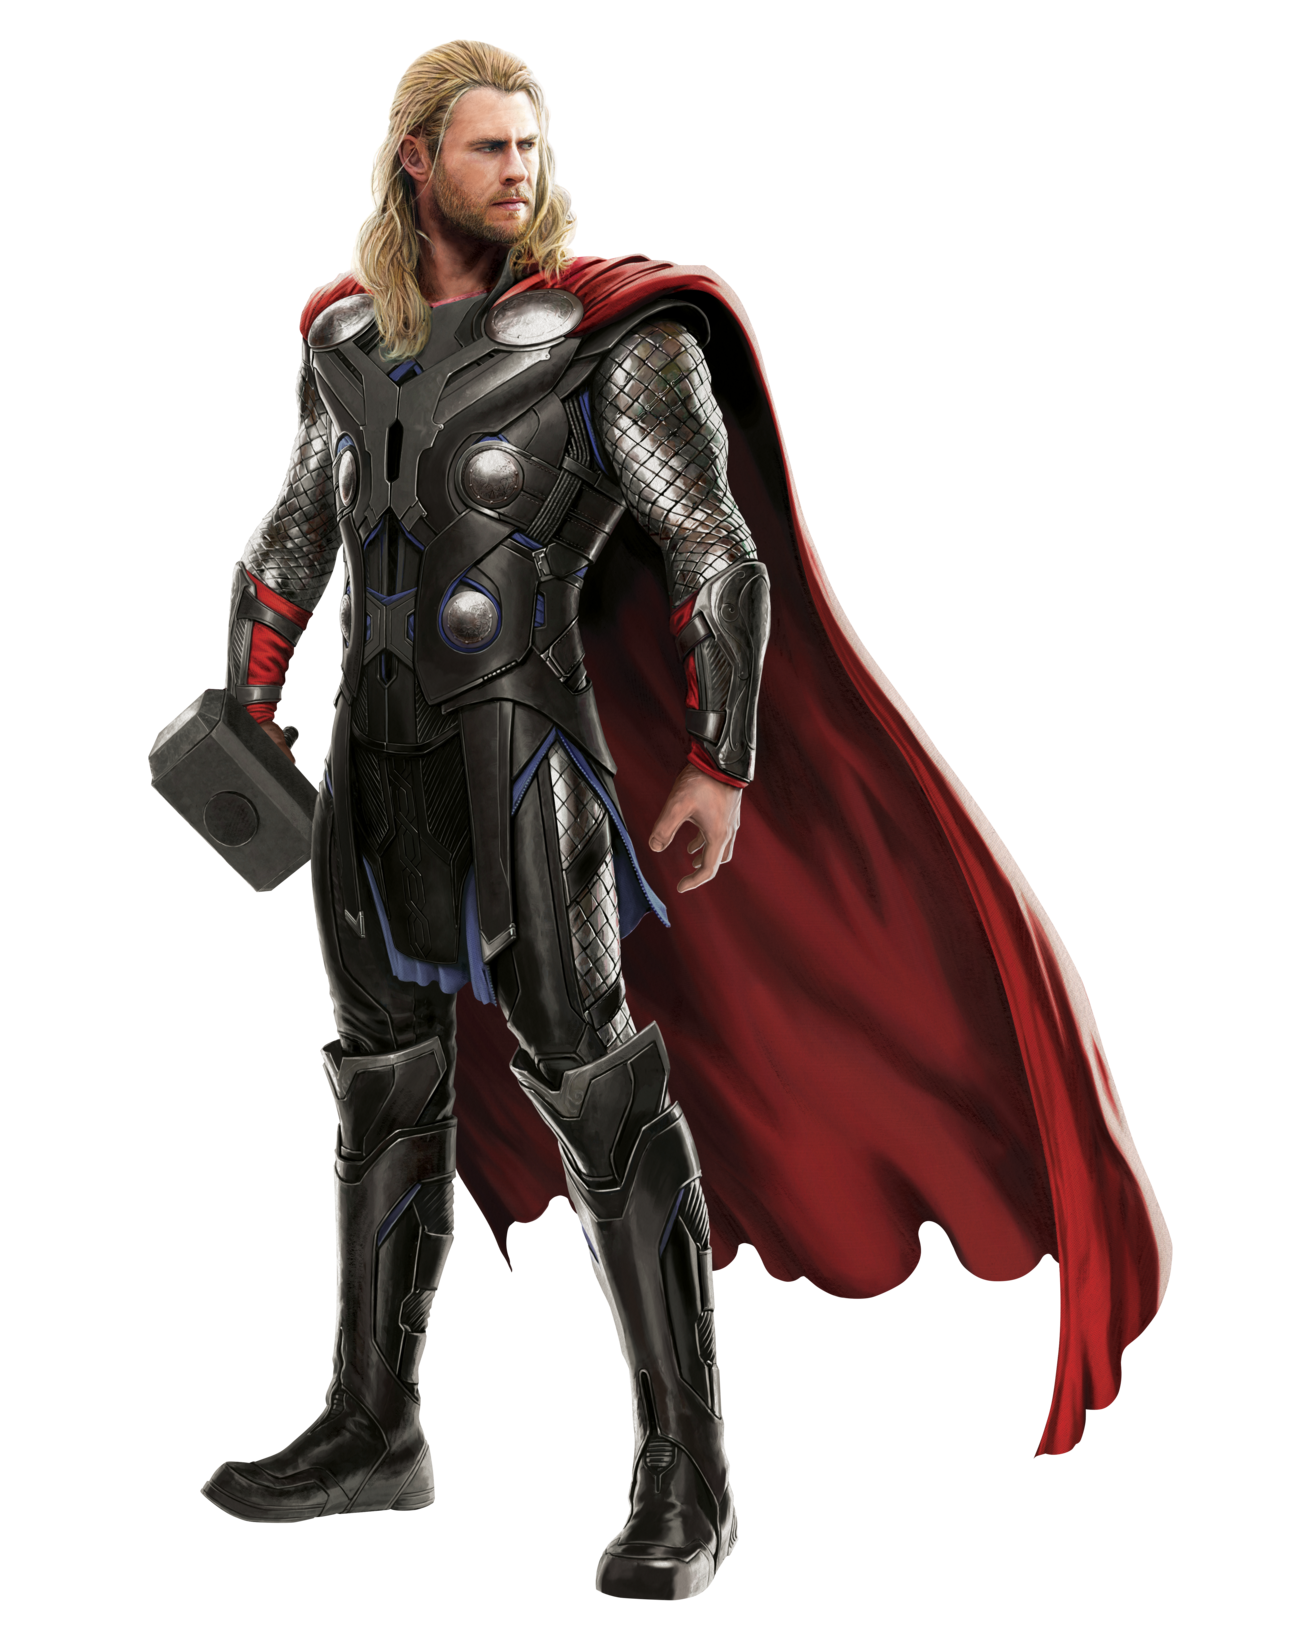 PNG File Name: Thor PlusPng.c